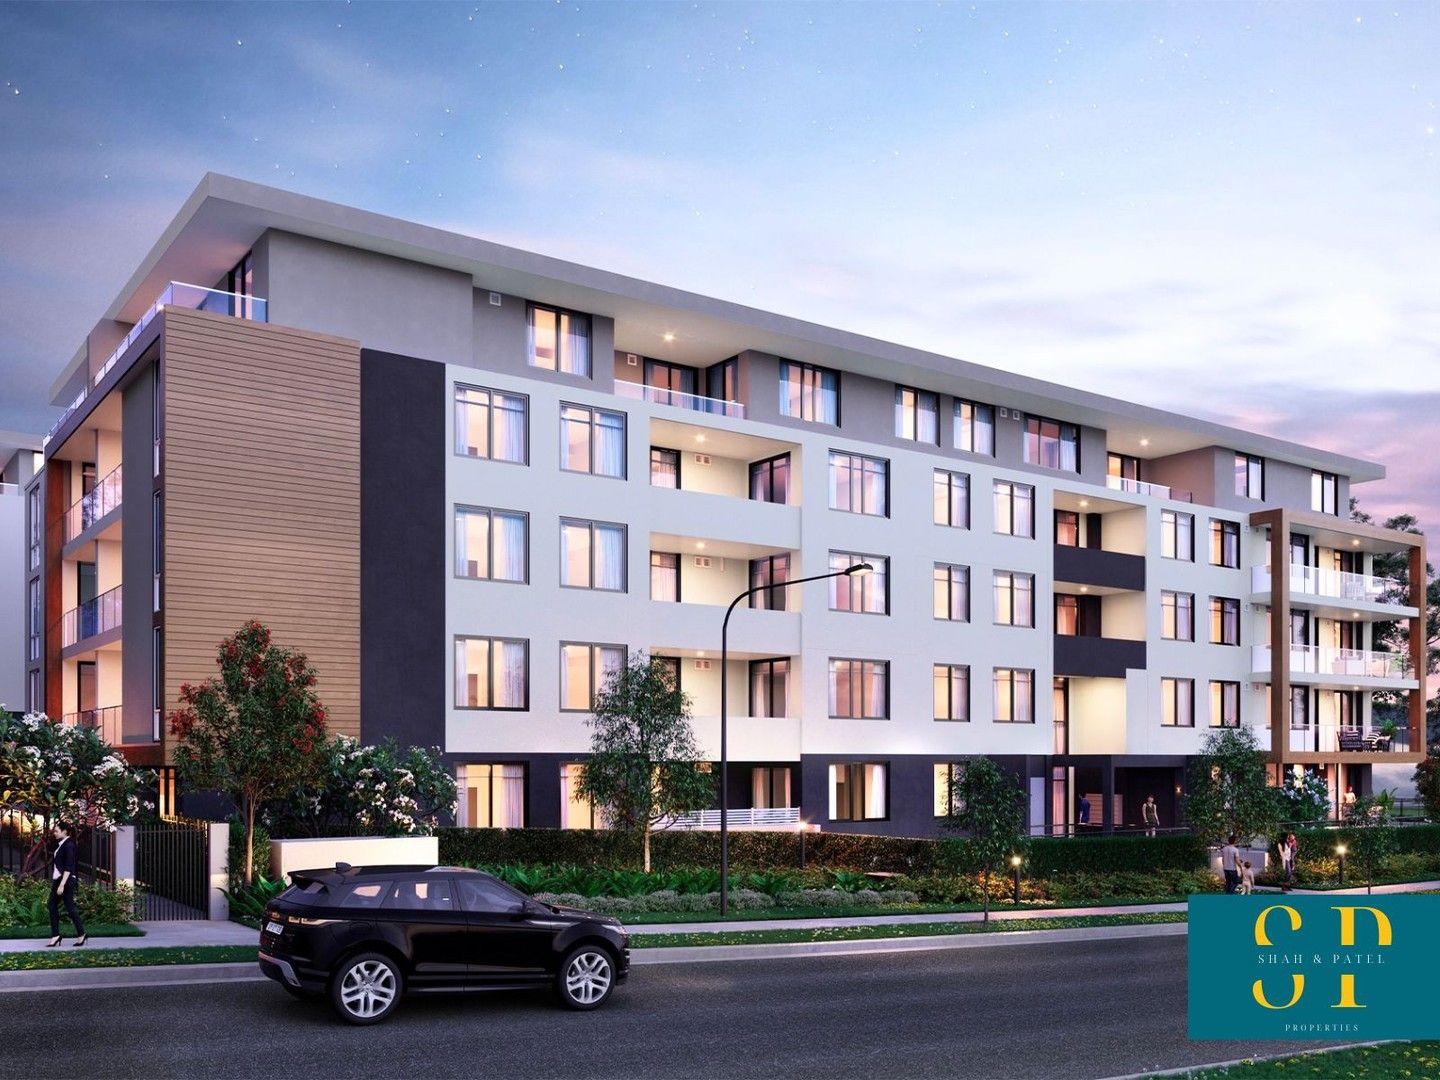 2 bedrooms New Apartments / Off the Plan in 5min Walking Distance To Train & Shopping SCHOFIELDS NSW, 2762